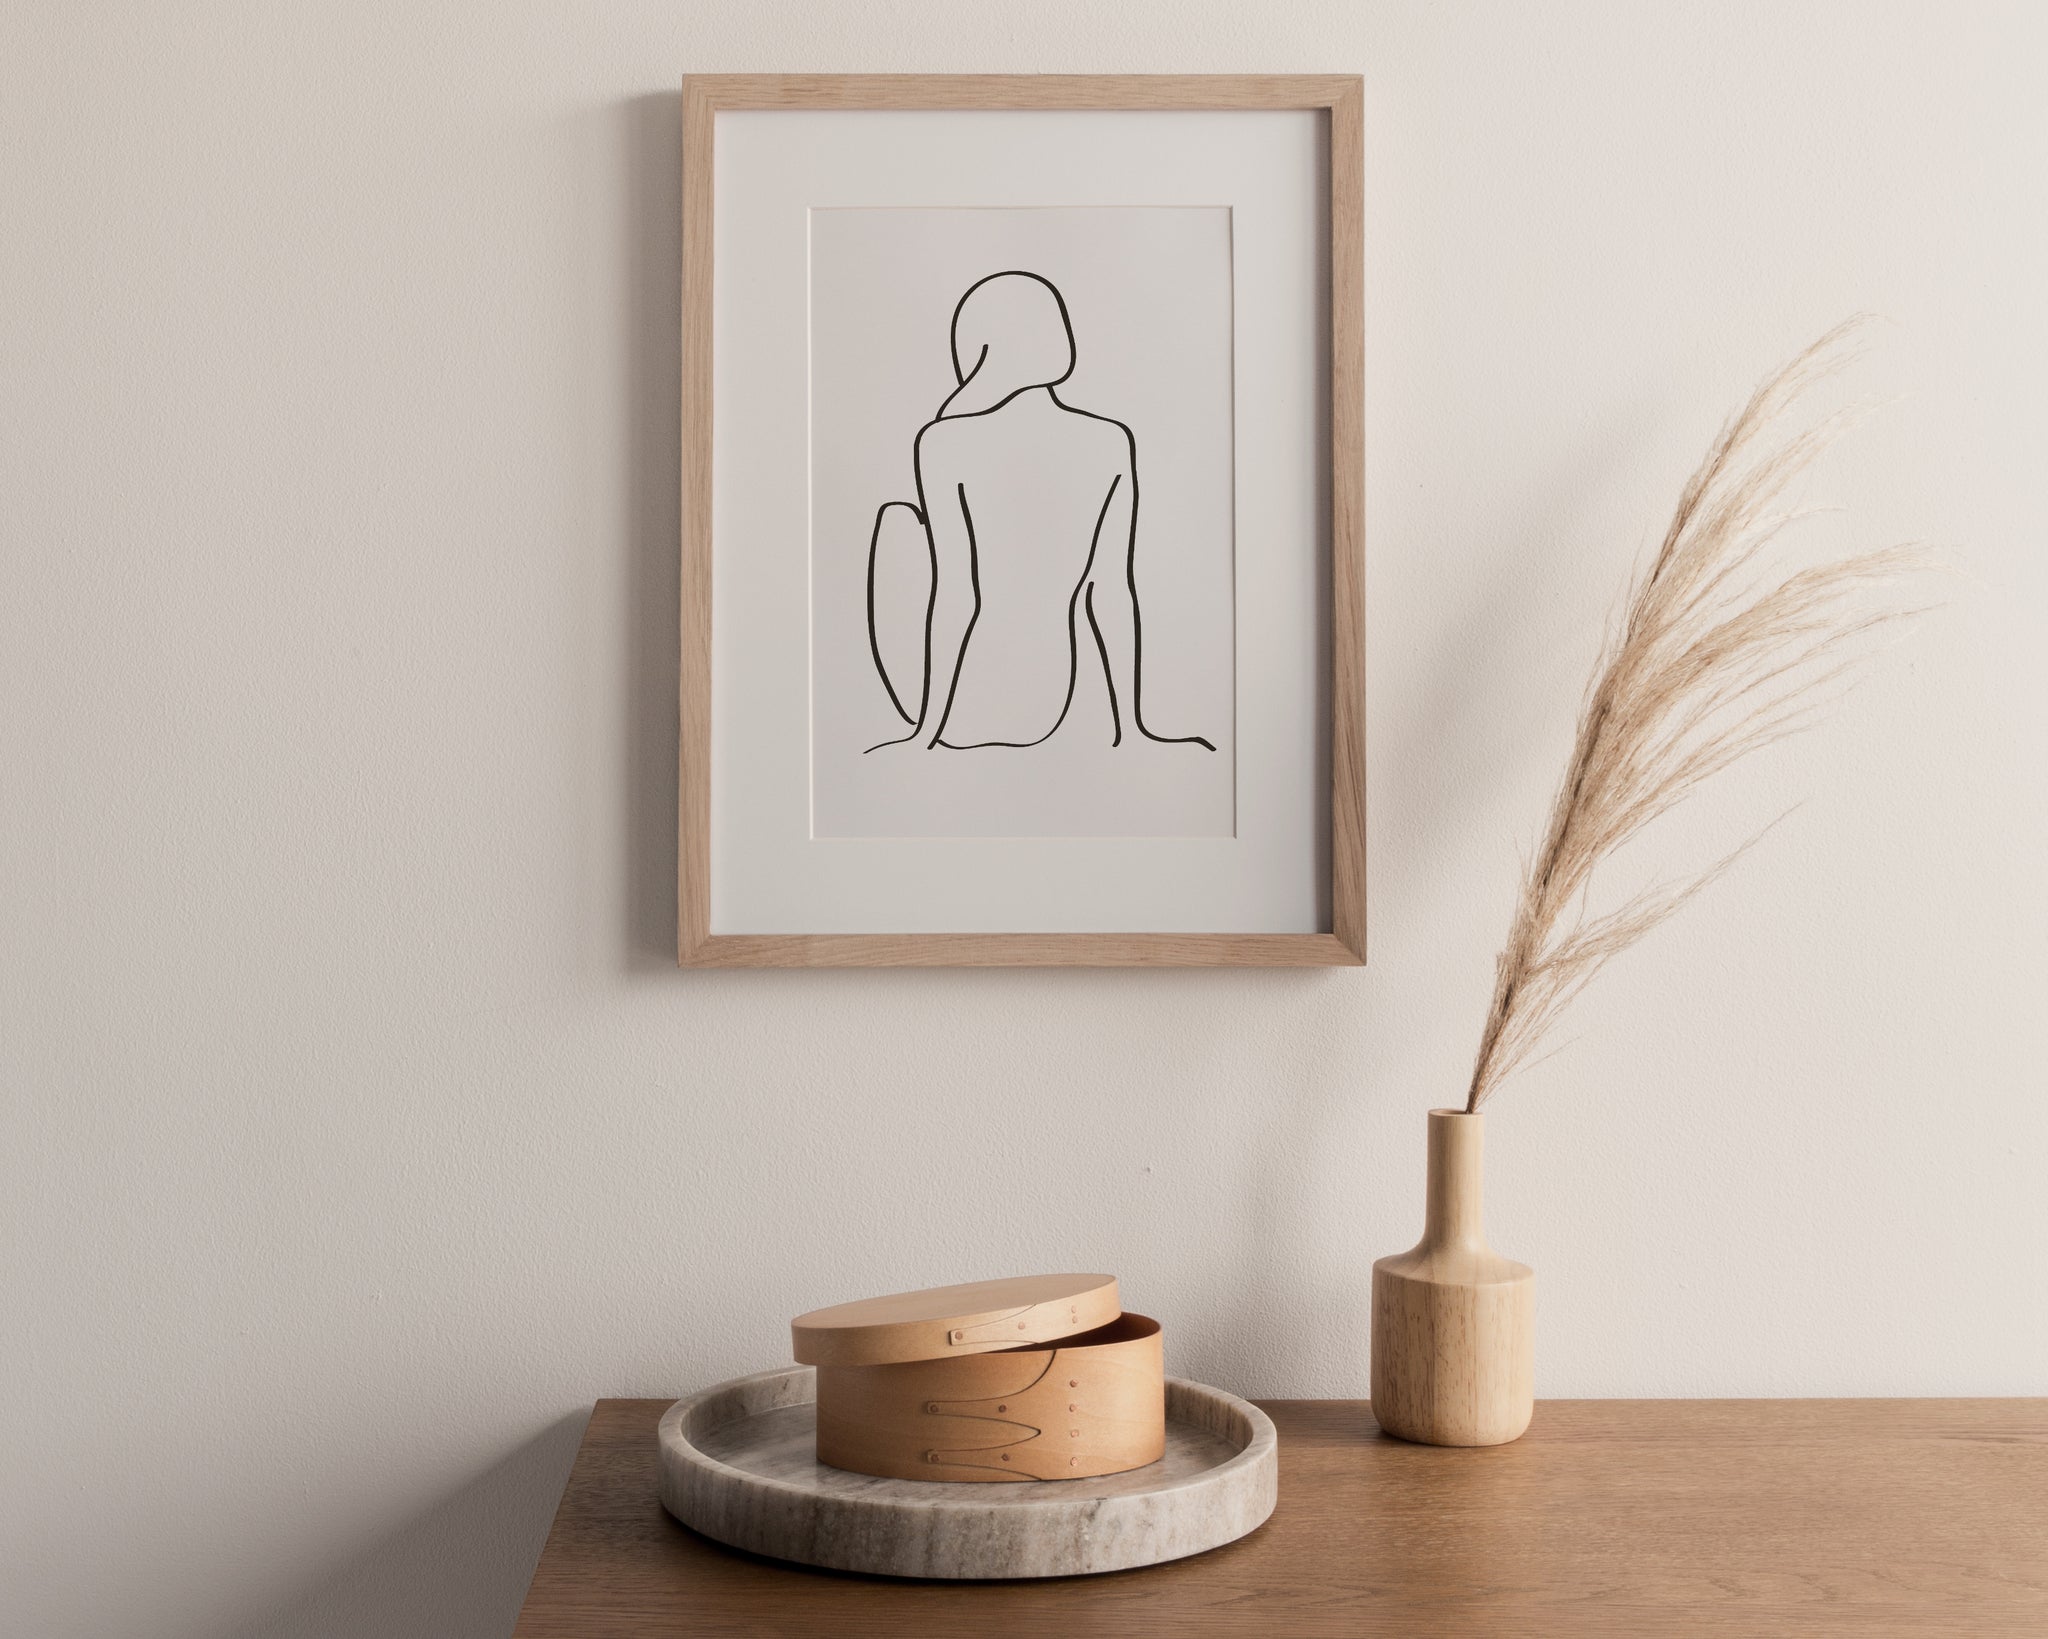 framed print of a drawing of a girl sitting. frame on a cream wall with table below